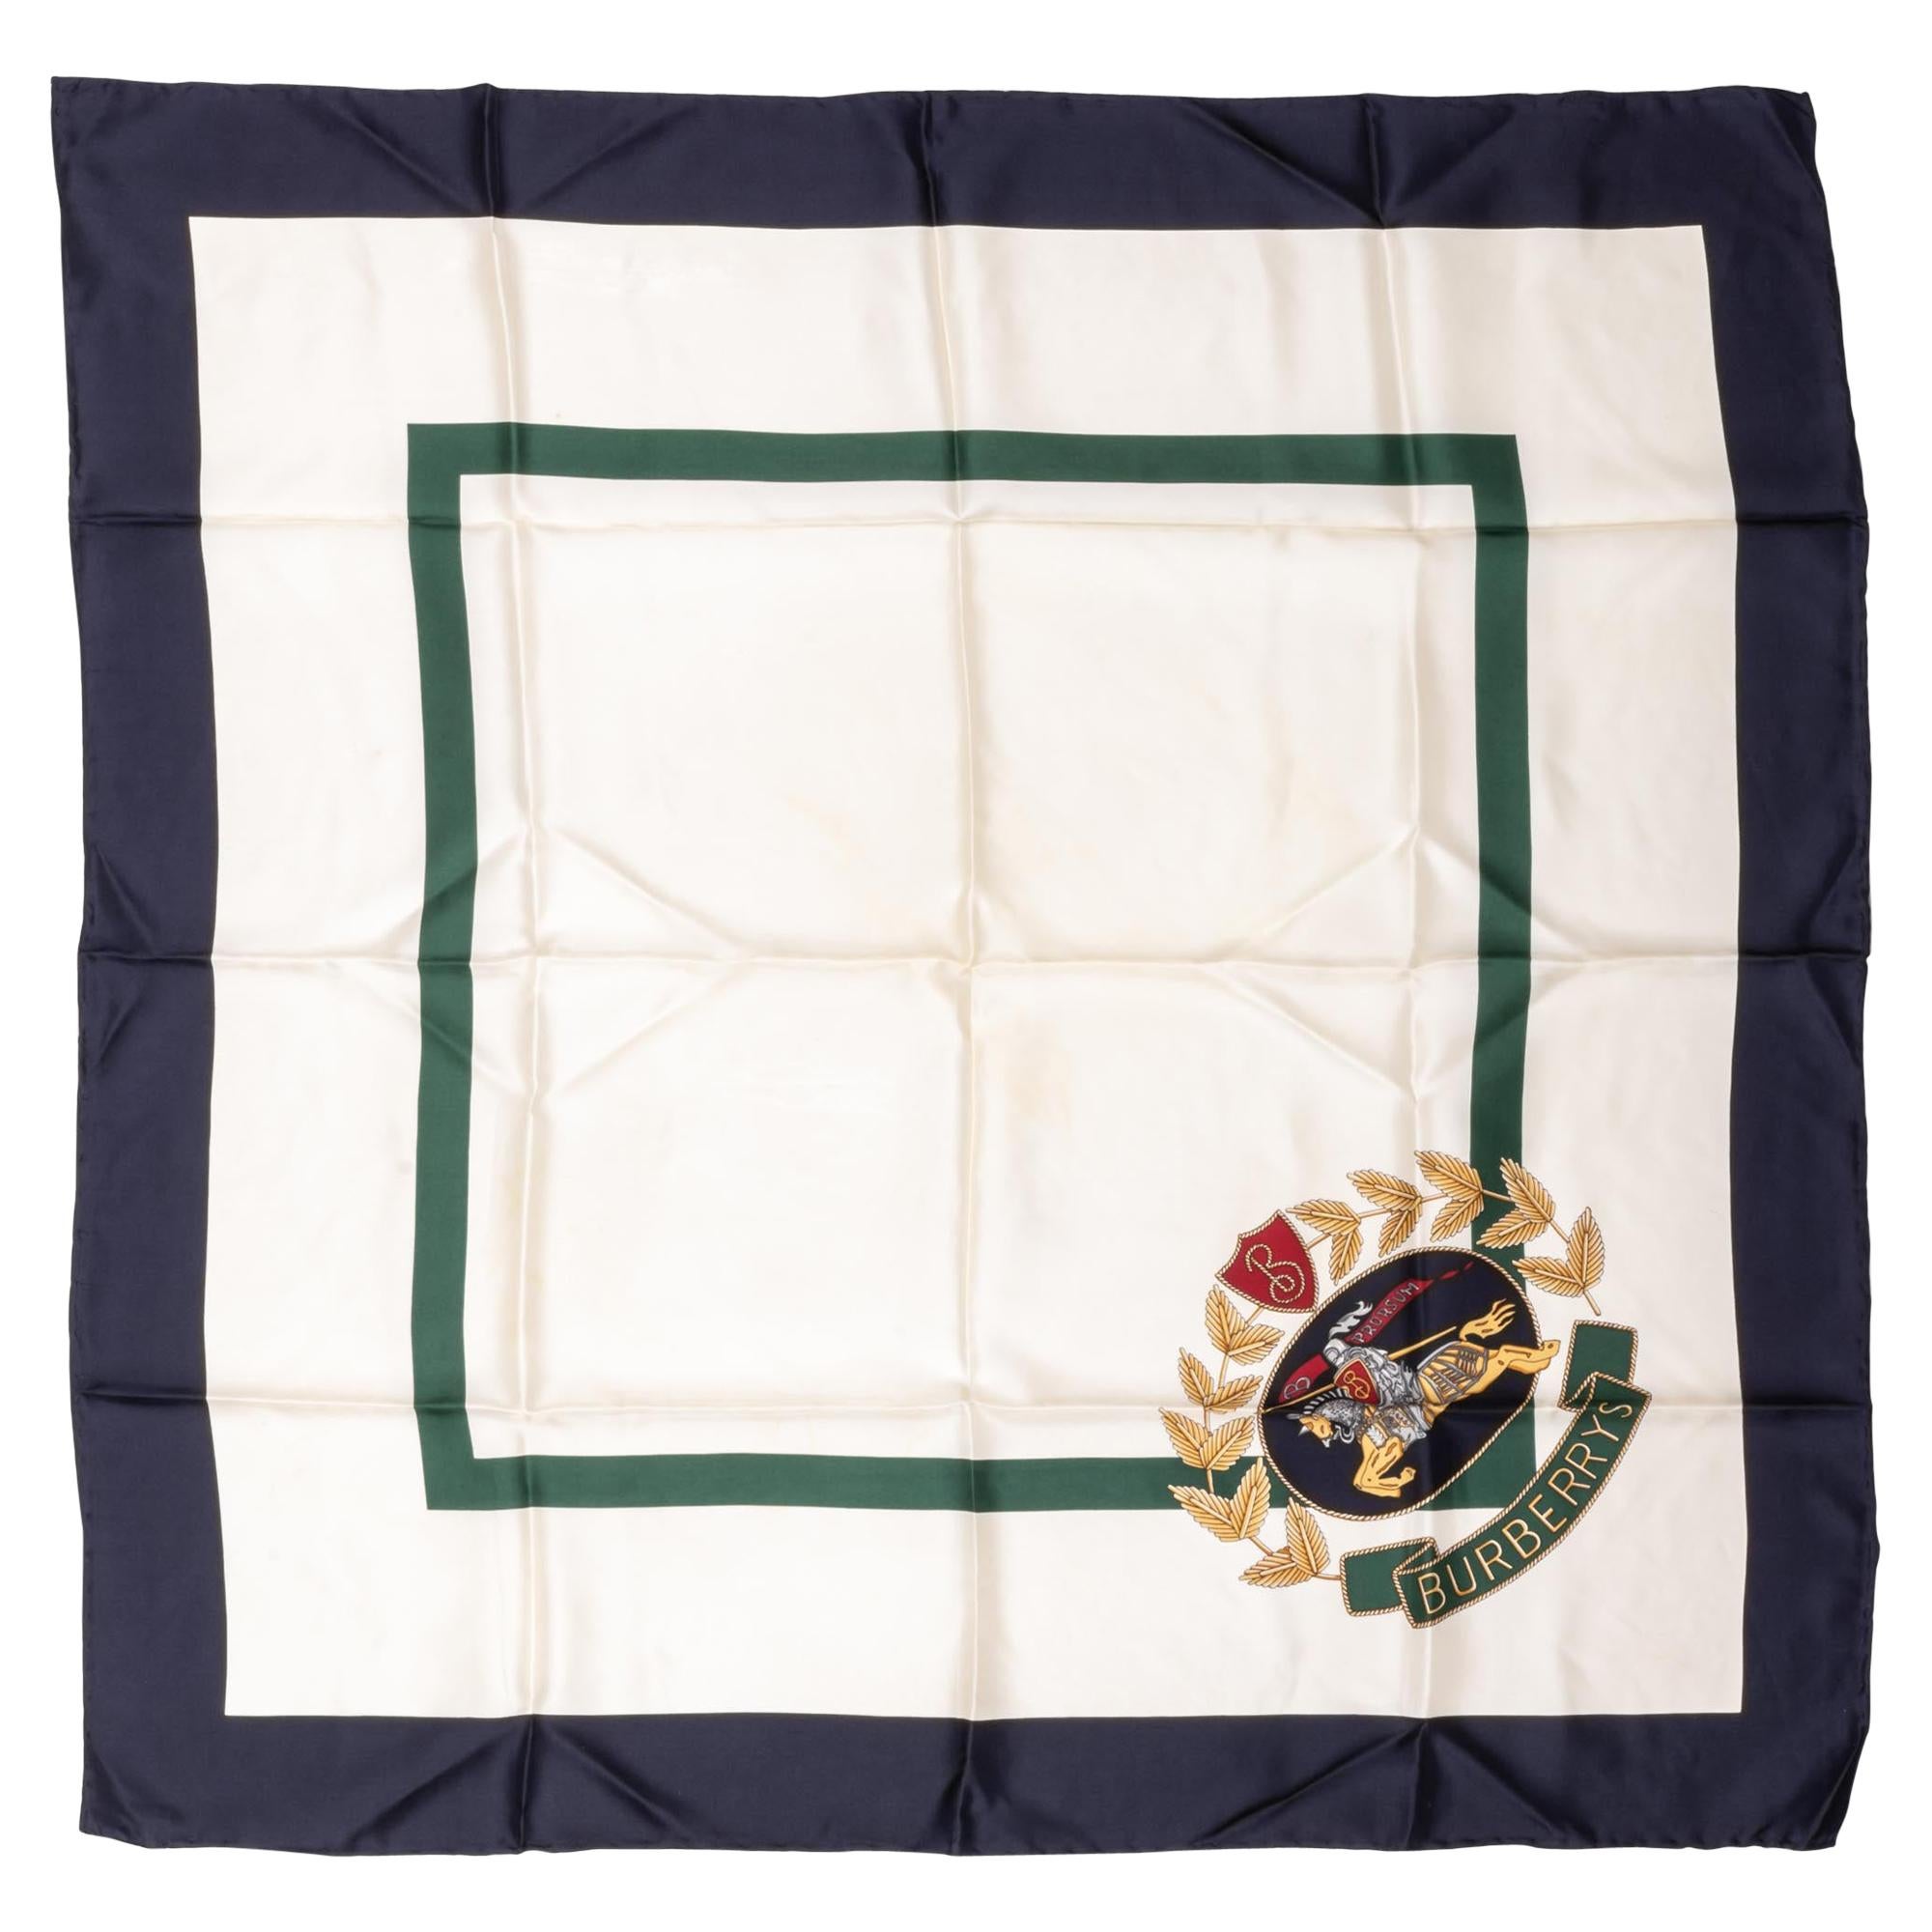 Bruberry White & Blue Crest Silk Scarf For Sale